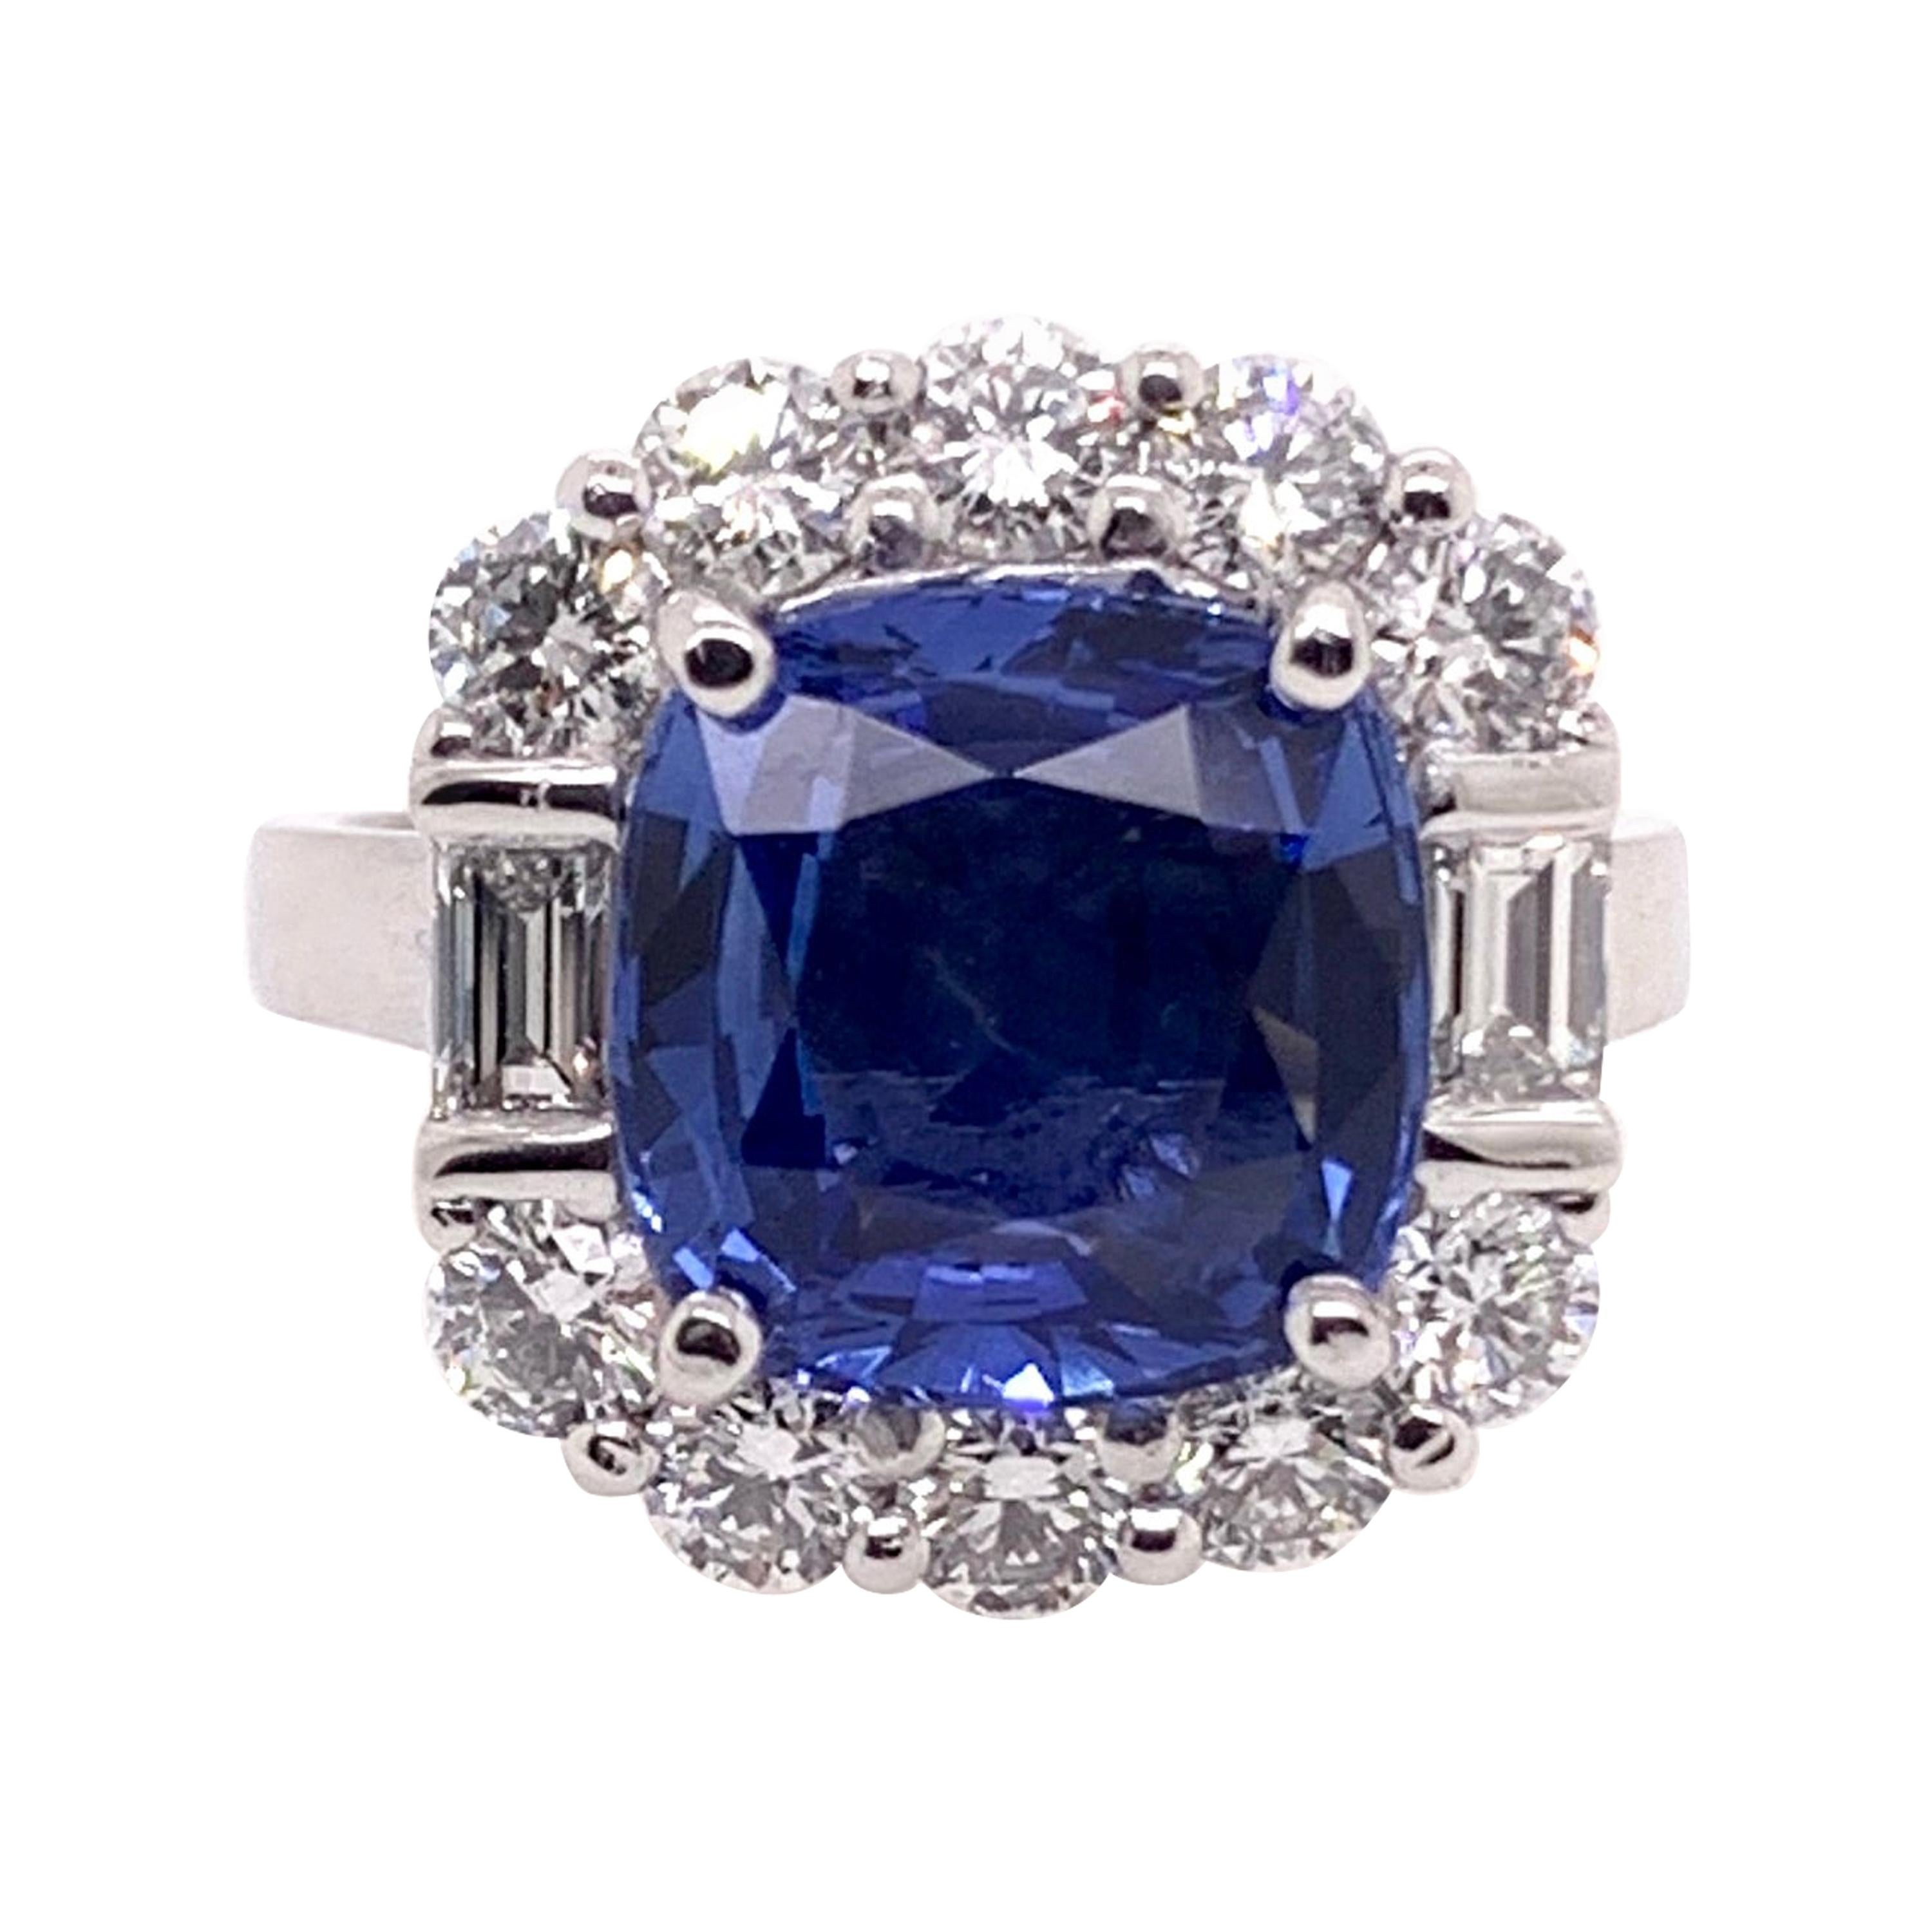 GIA Certified Blue Sapphire Diamond Cocktail Ring in Platinum